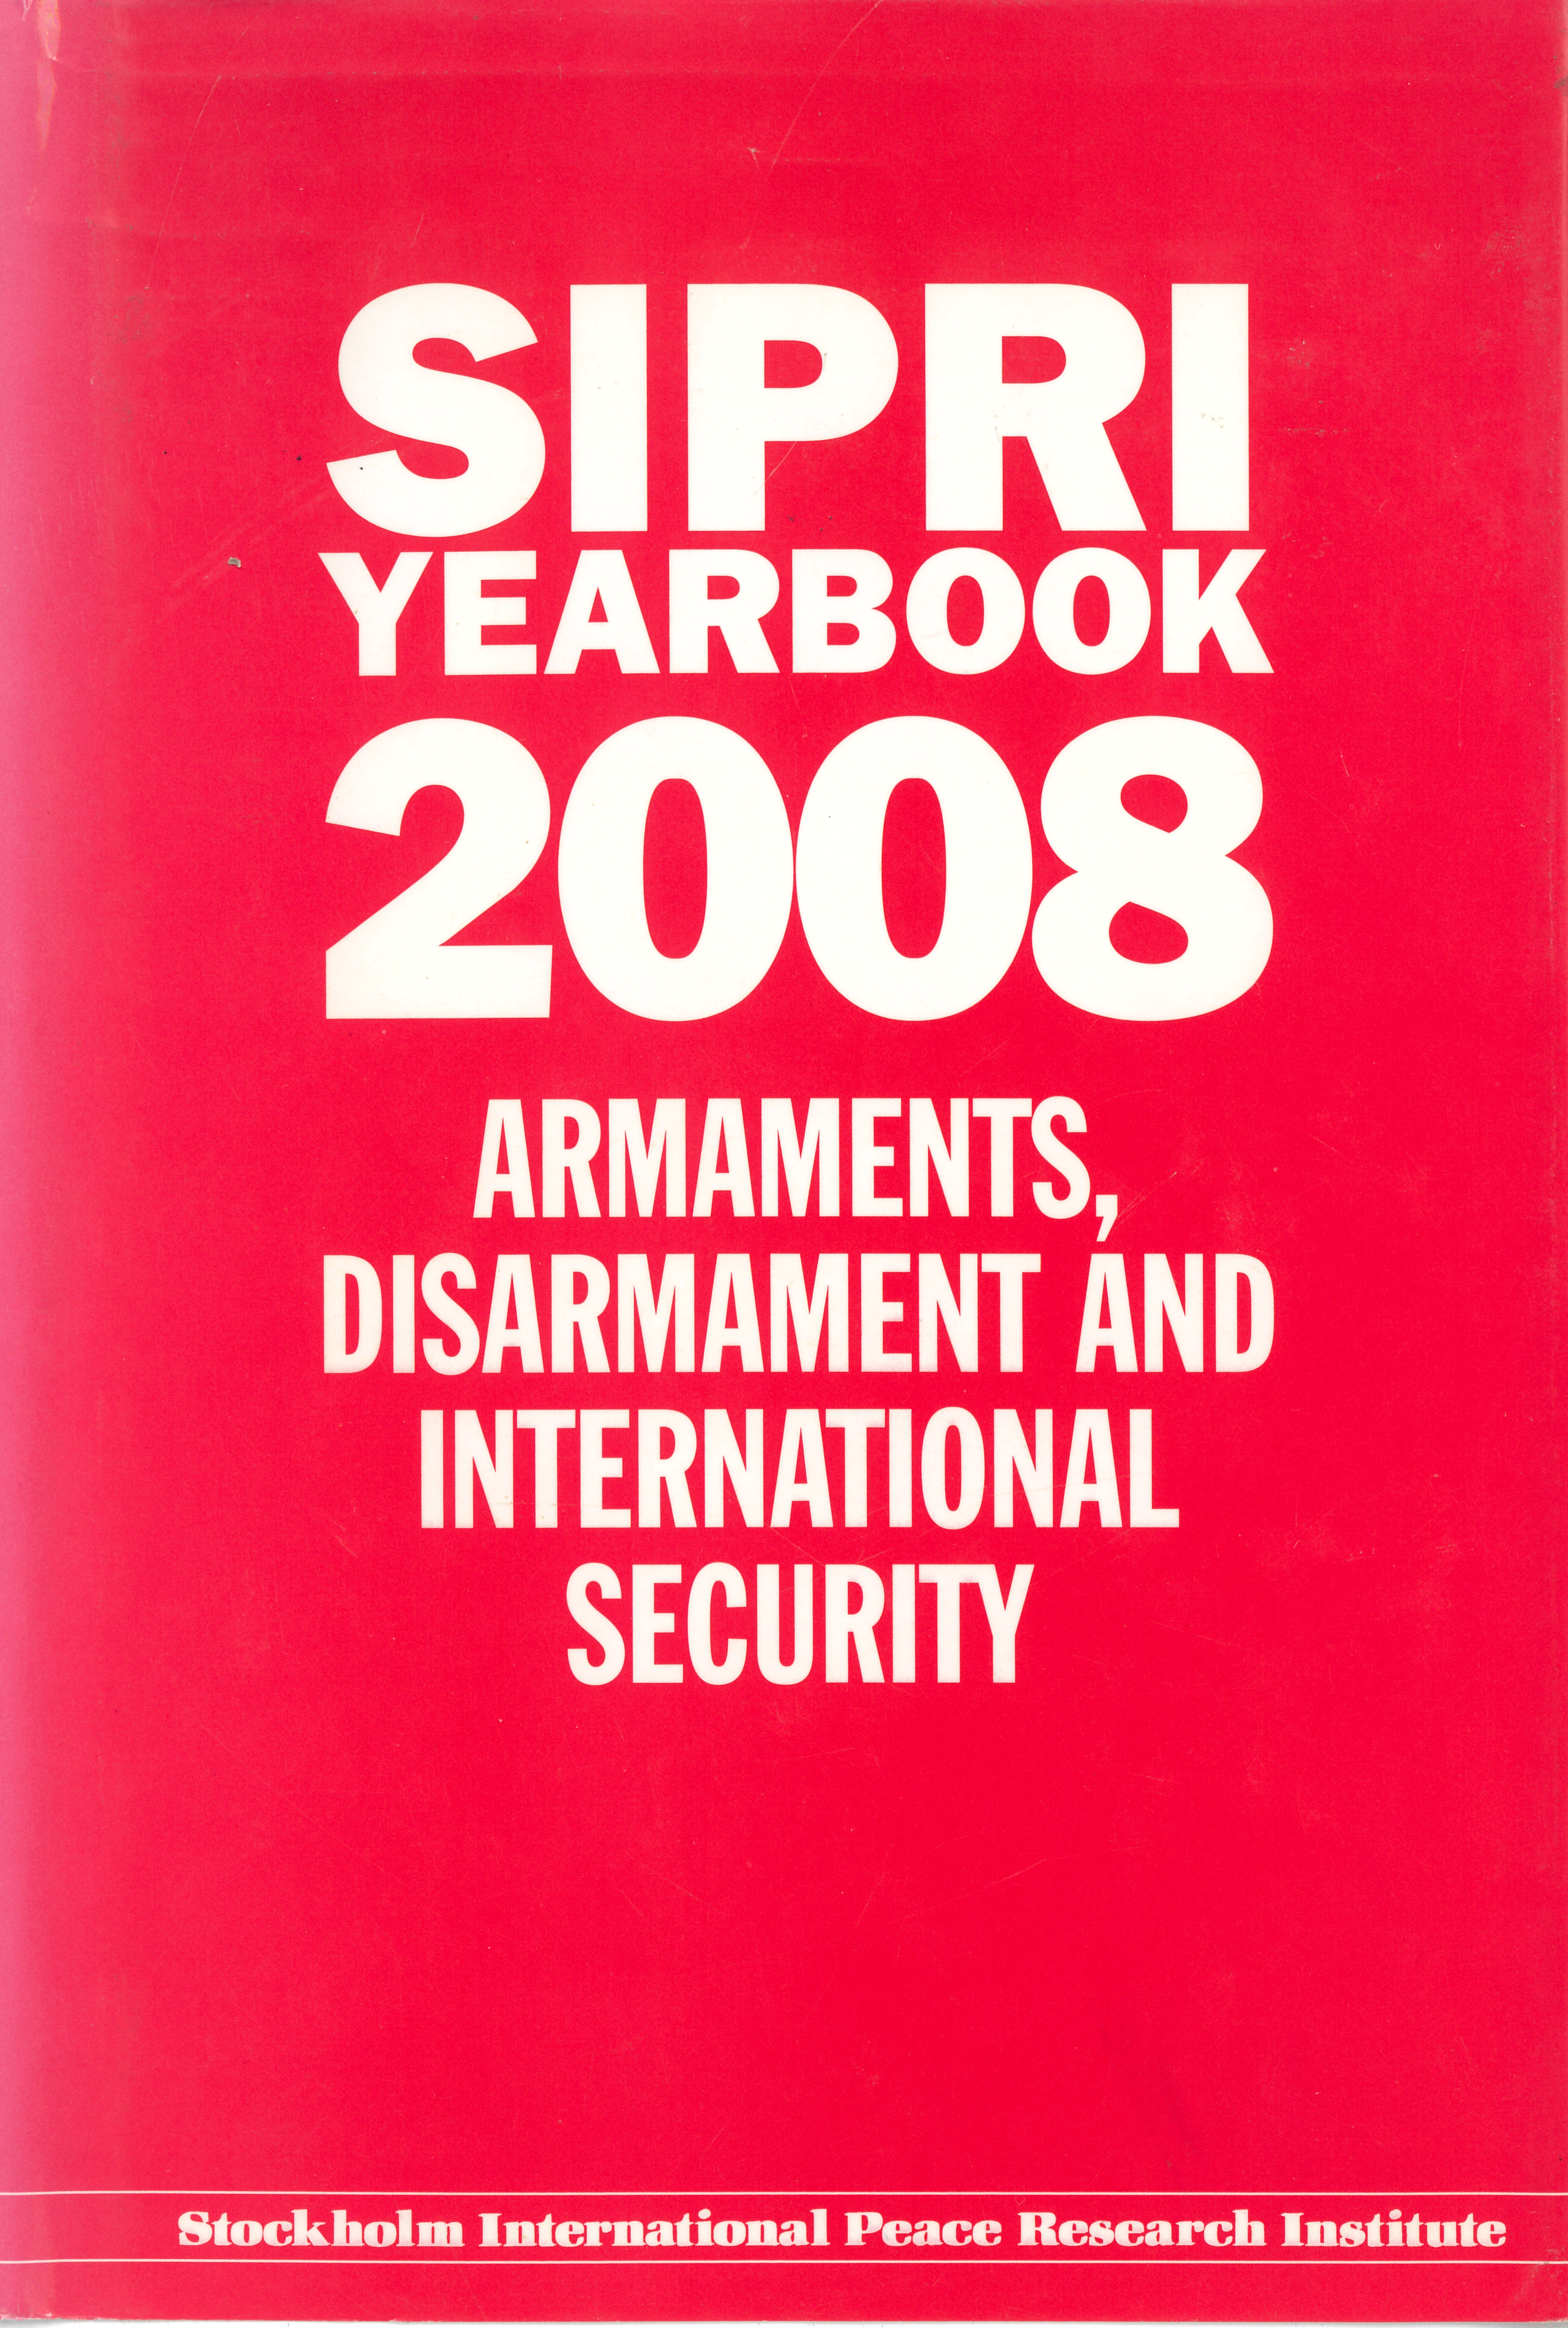 SIPRI yearbook 2008 cover